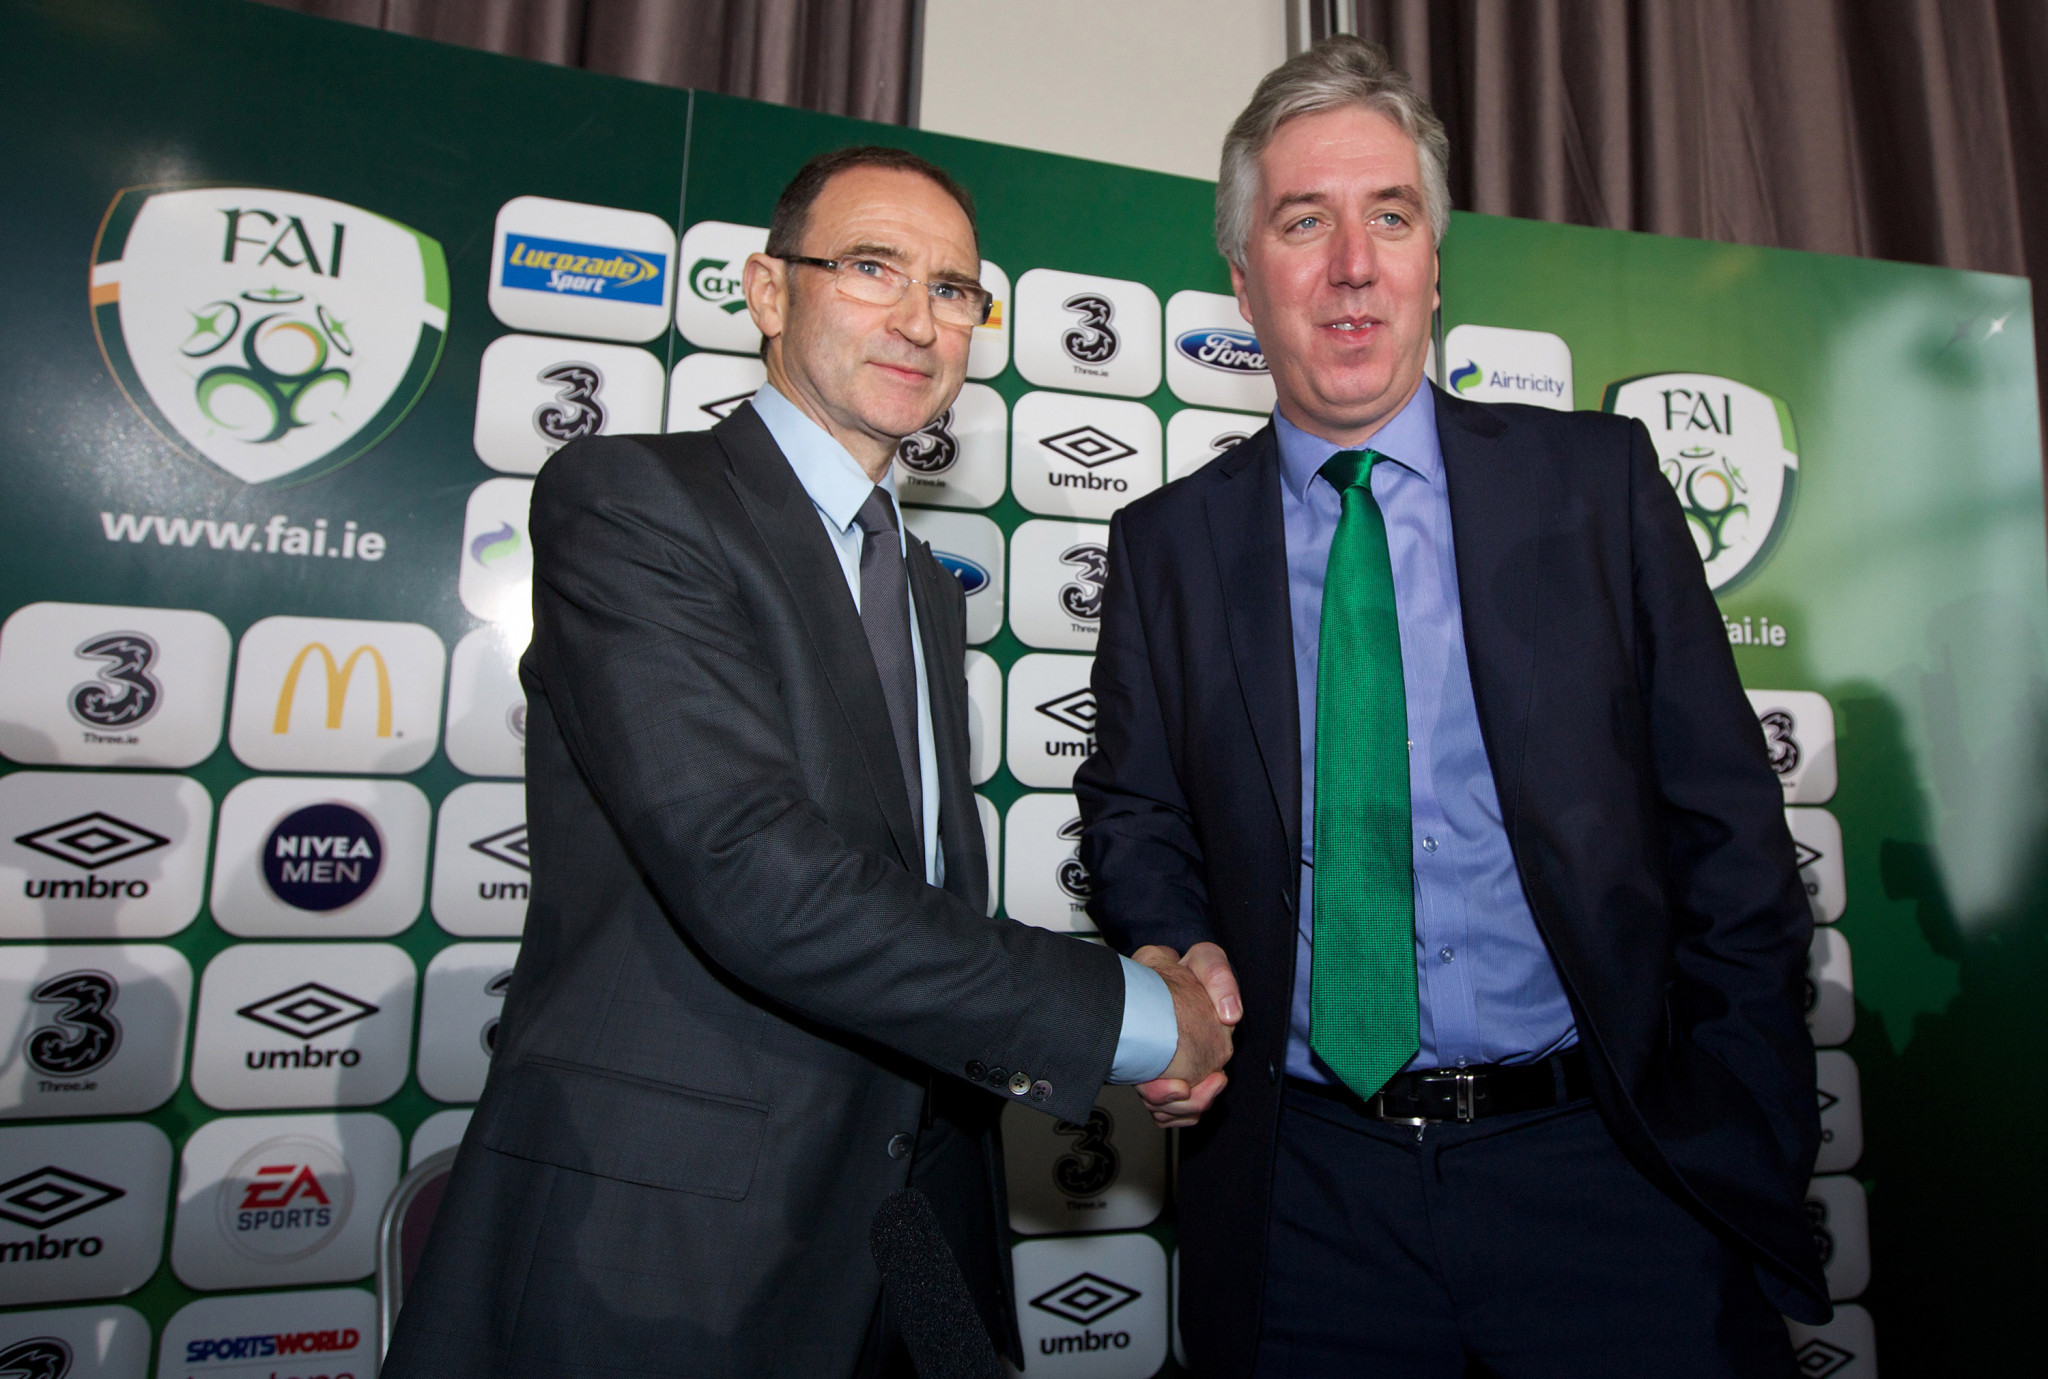 John Delaney, former chief executive of the FAI, shaking hands with newly appointed Ireland manager Martin O'Neill in 2013 ©Getty Images